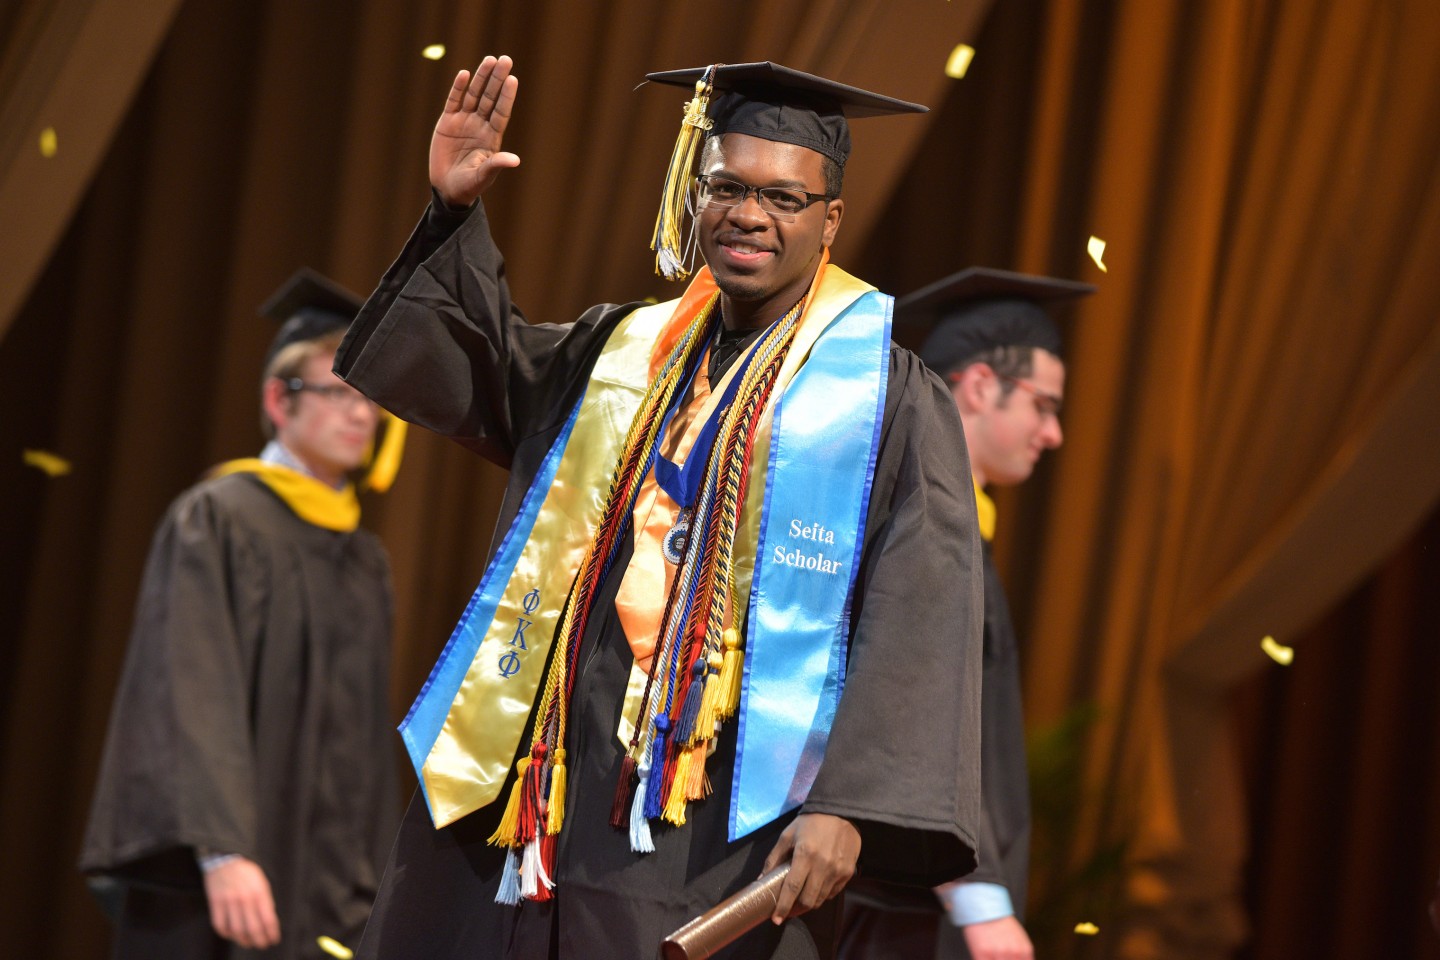 J. Gabriel Ware, dressed in his graduation regalia, waves at the camera after receiving his diploma.